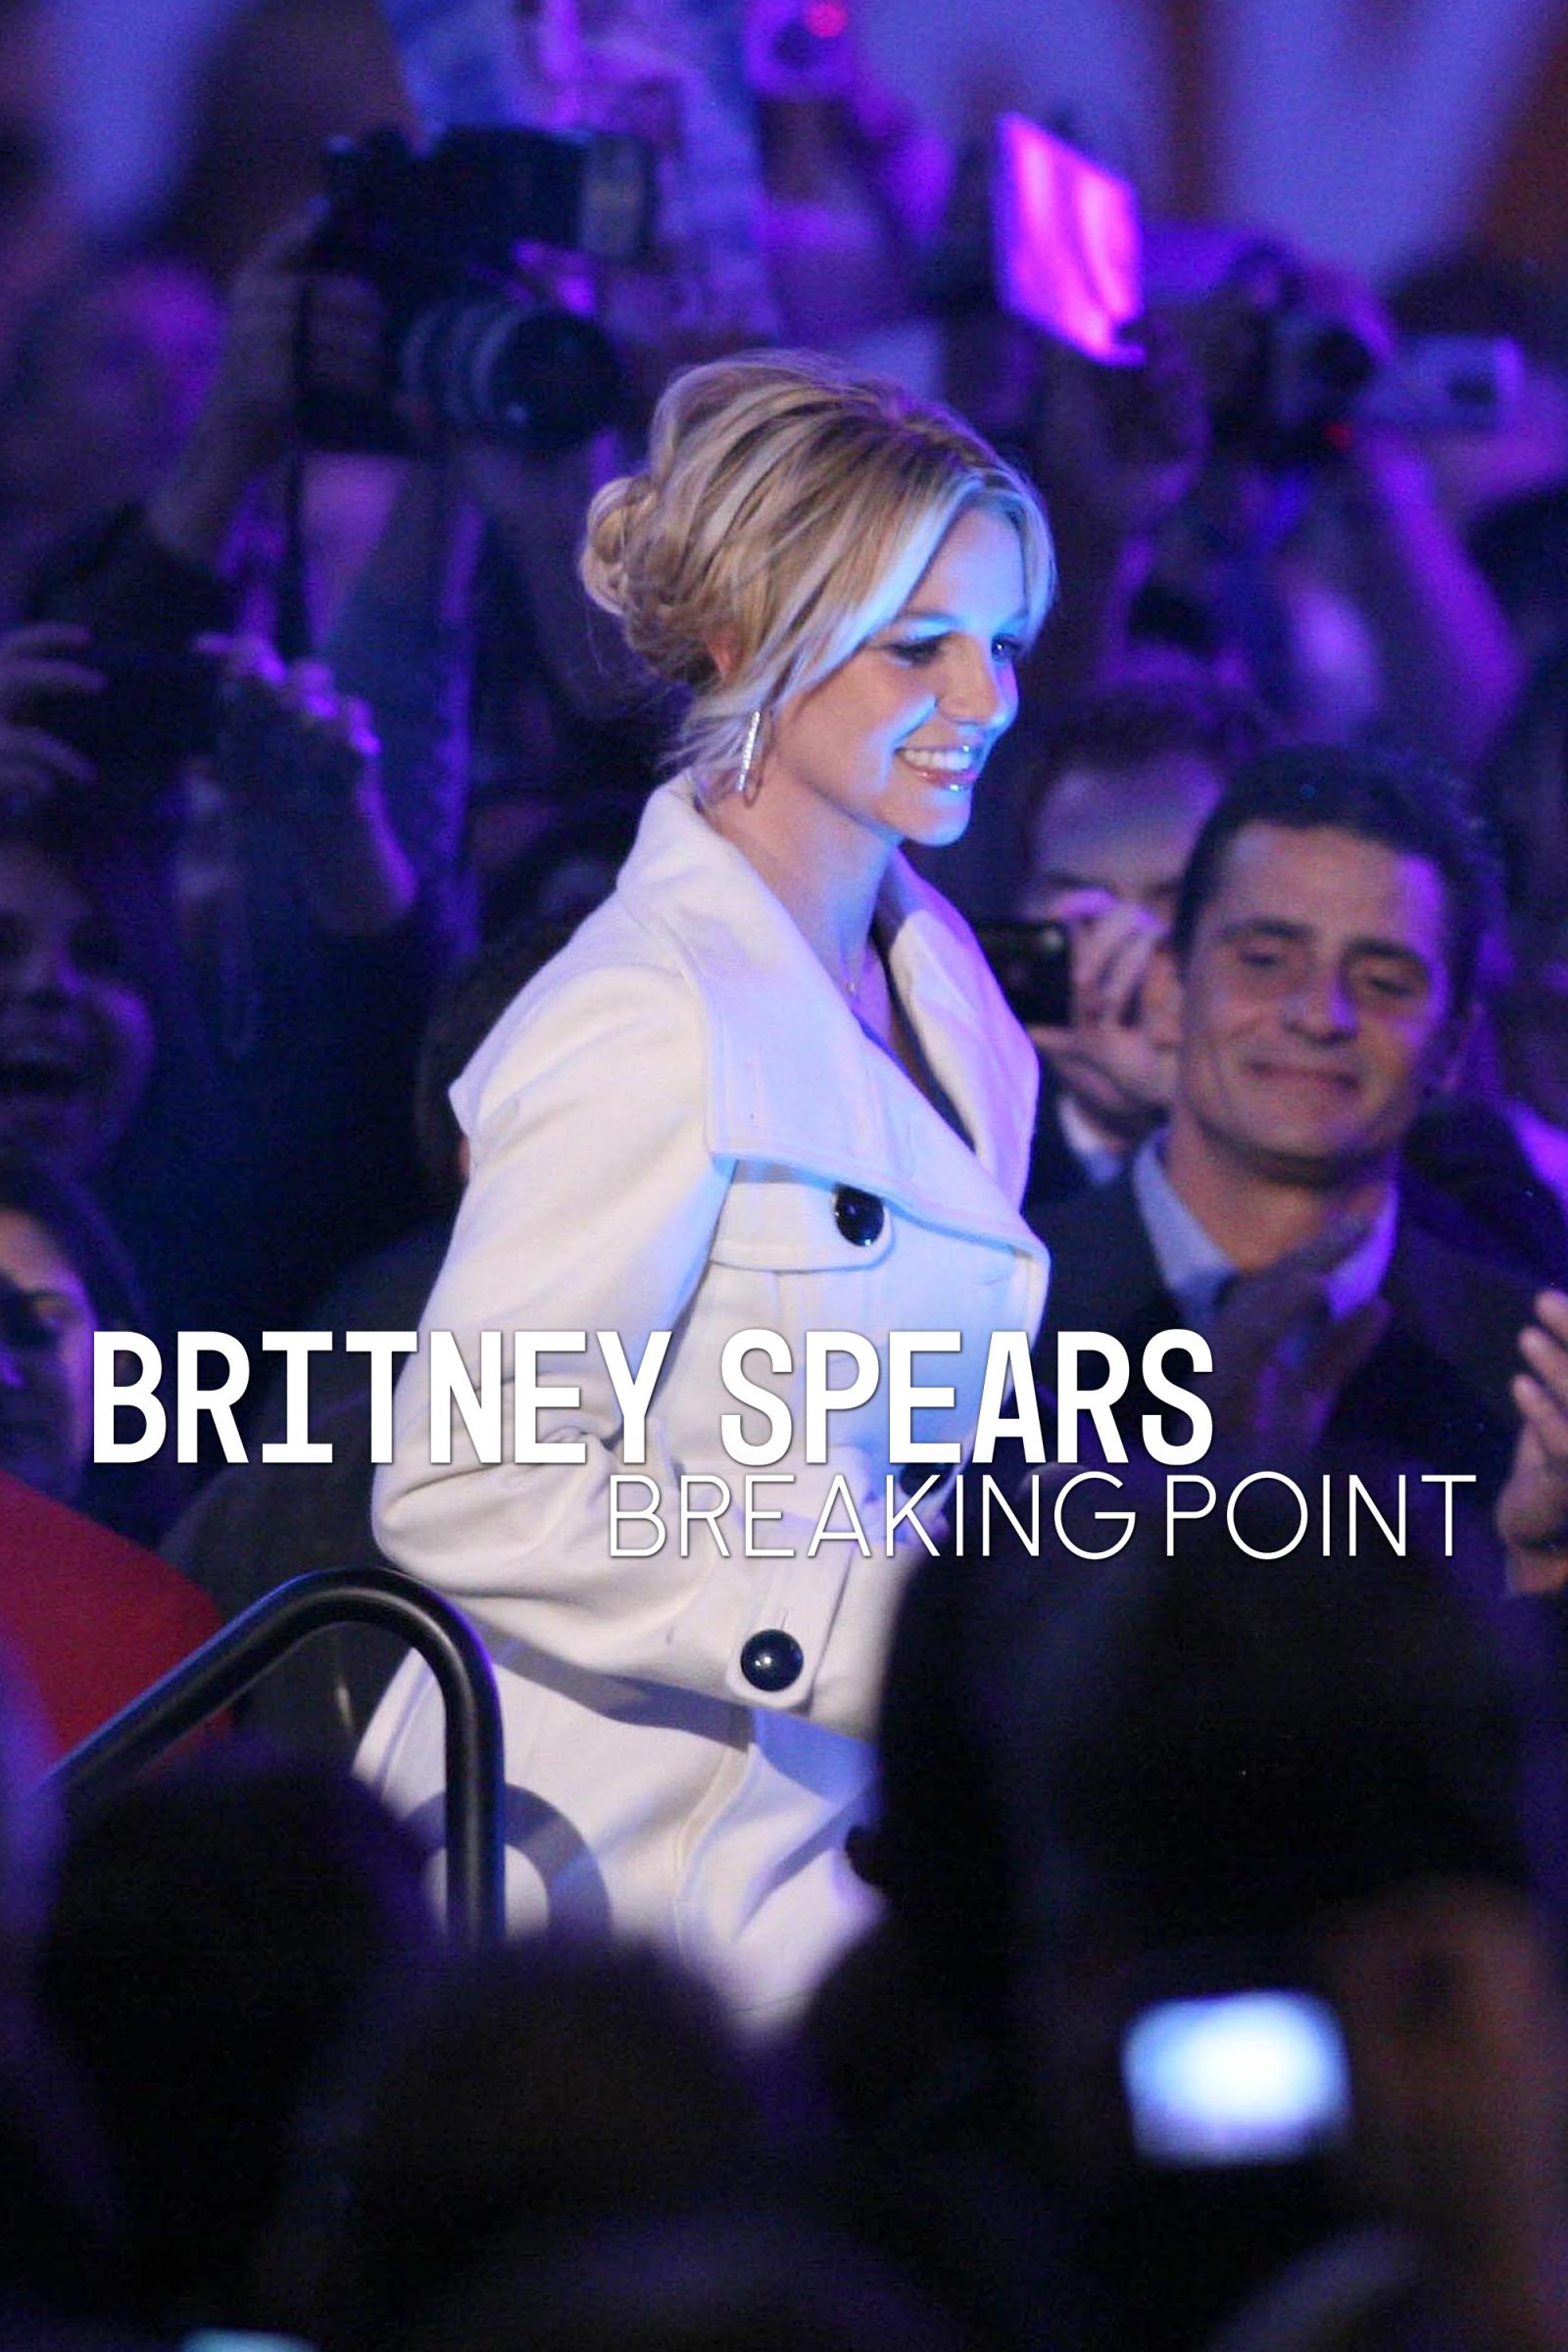 Where to stream Britney Spears Breaking Point